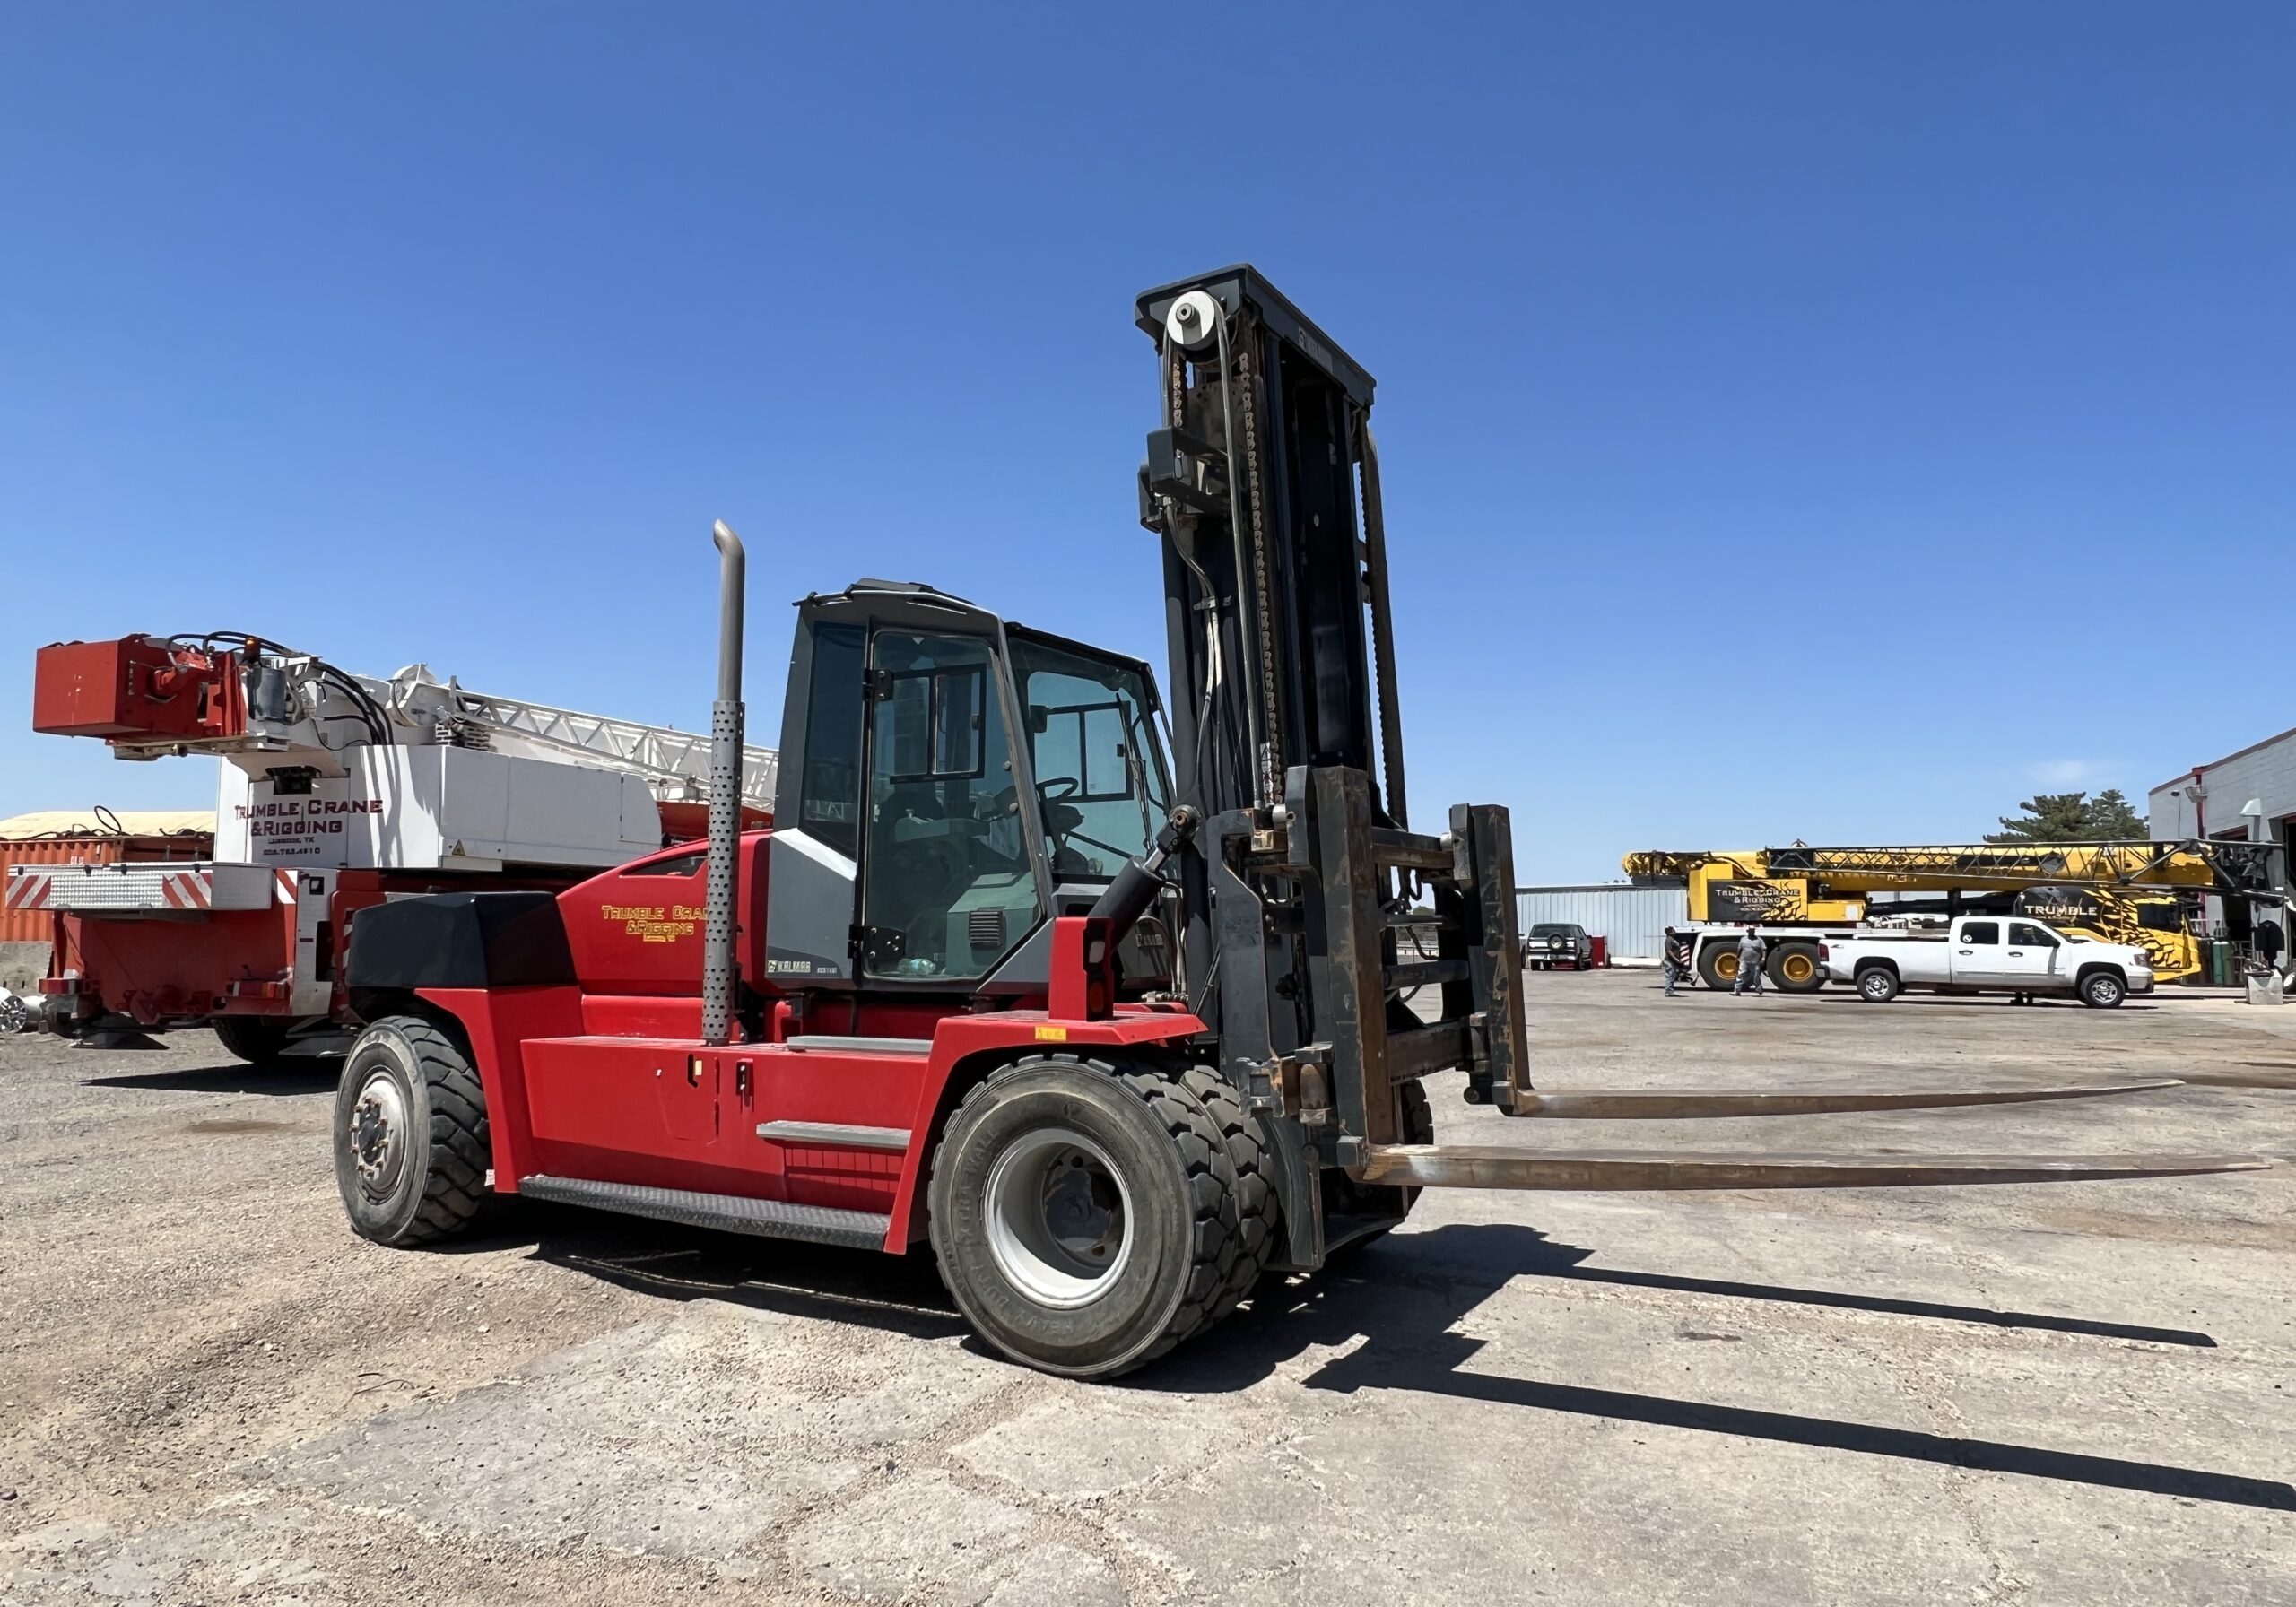 A large red forklift parked in an empty lot.